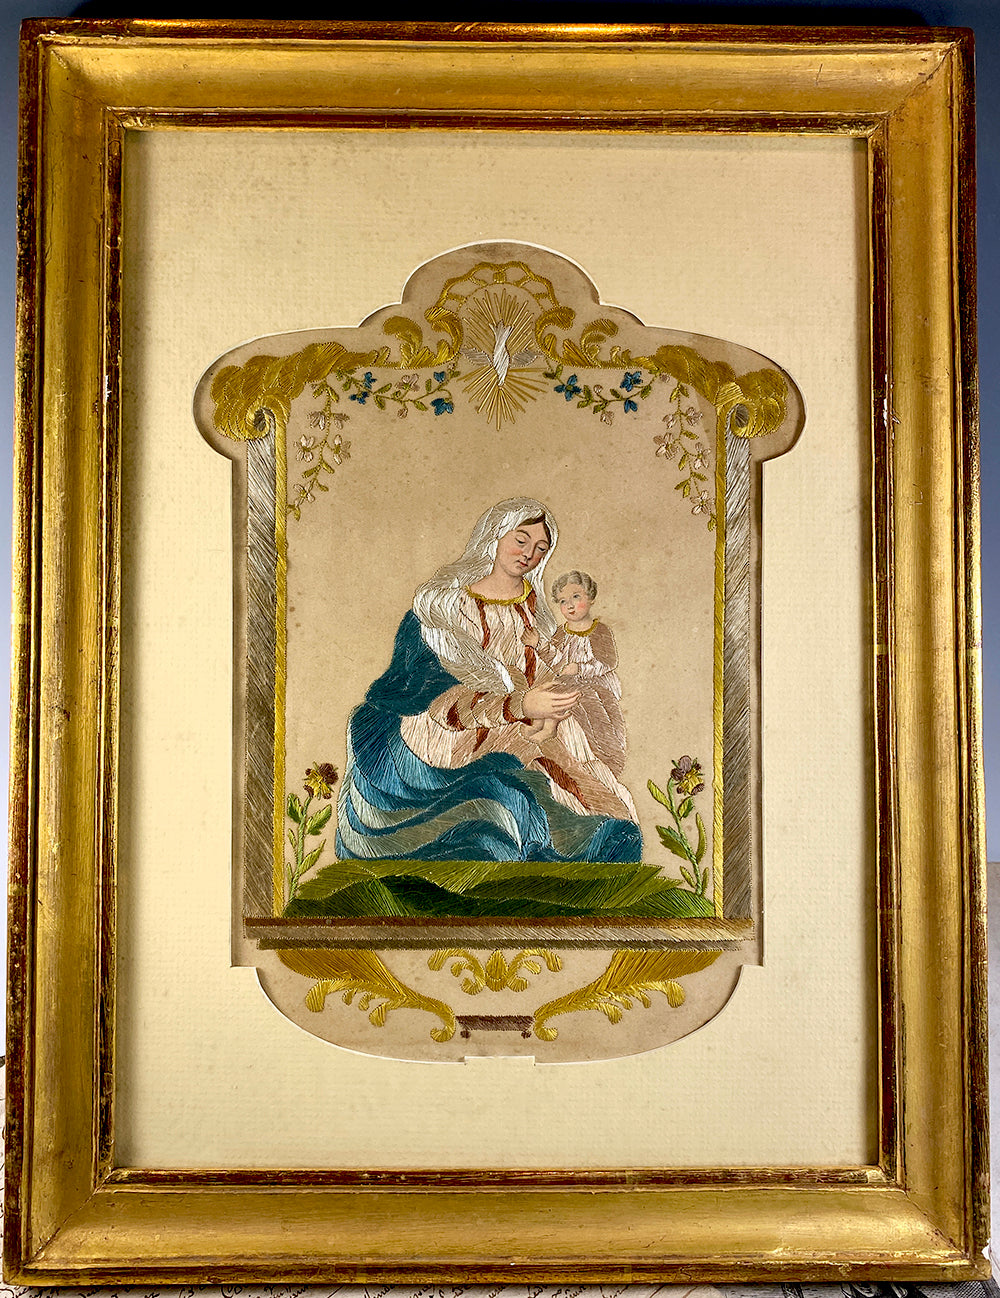 Antique 19th c French Silk Embroidery Sampler, Religious Theme, Mary and Jesus, Dove in Frame 14" x 10.5"